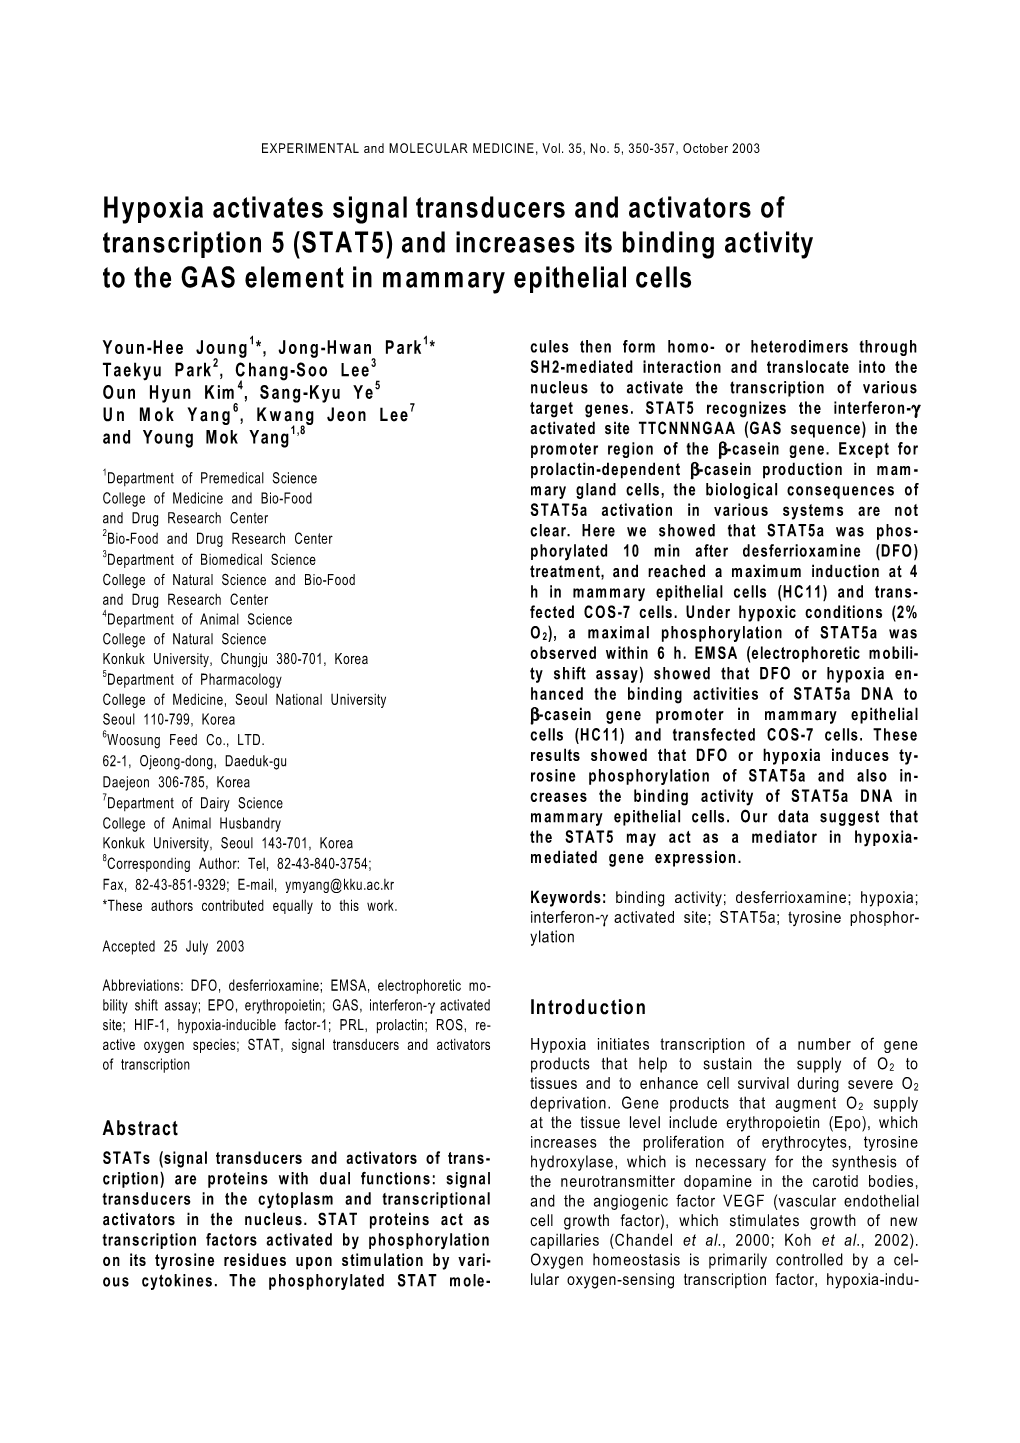 STAT5) and Increases Its Binding Activity to the GAS Element in Mammary Epithelial Cells